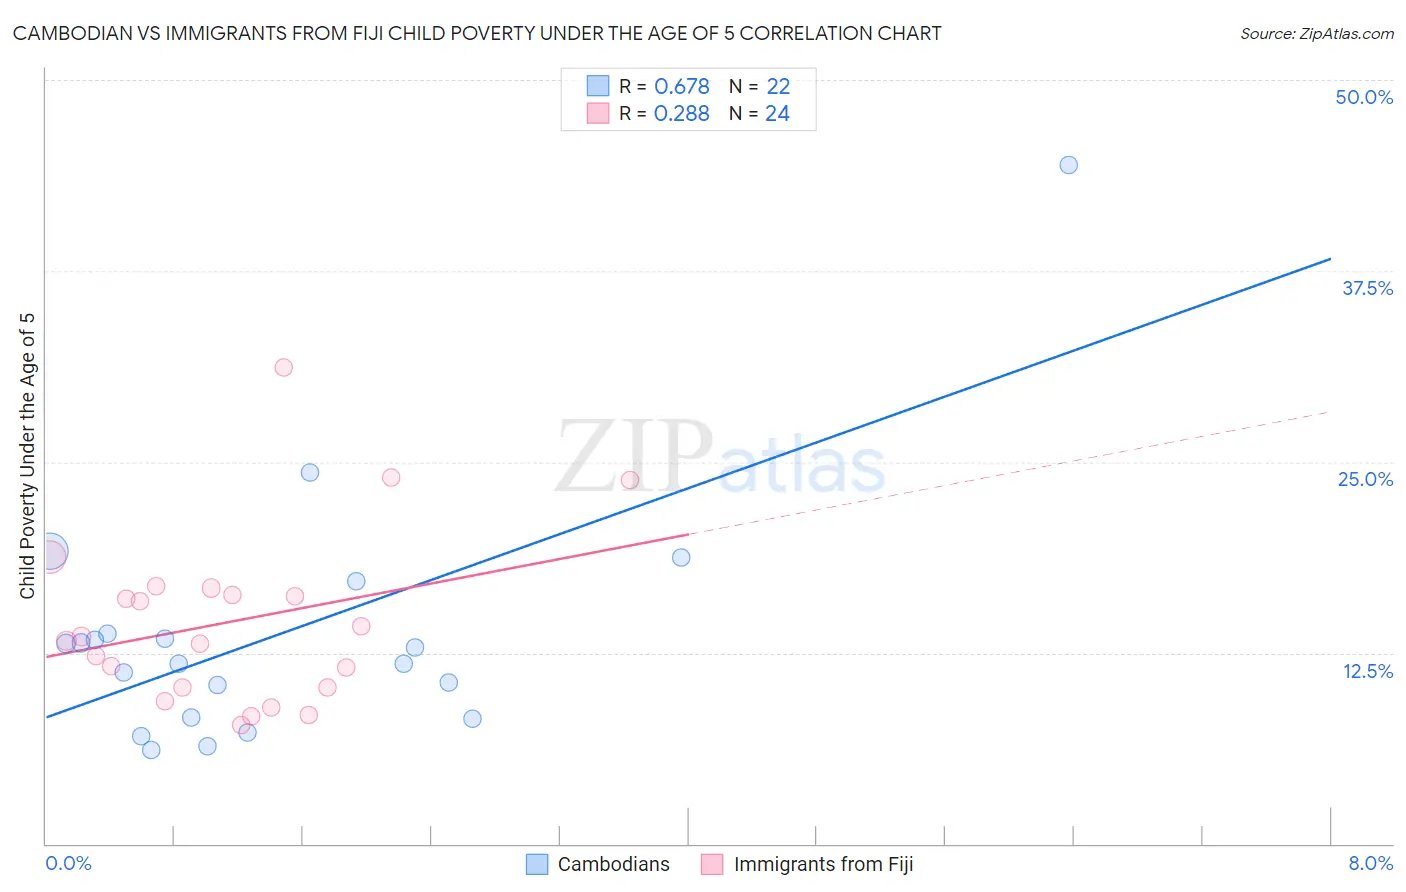 Cambodian vs Immigrants from Fiji Child Poverty Under the Age of 5